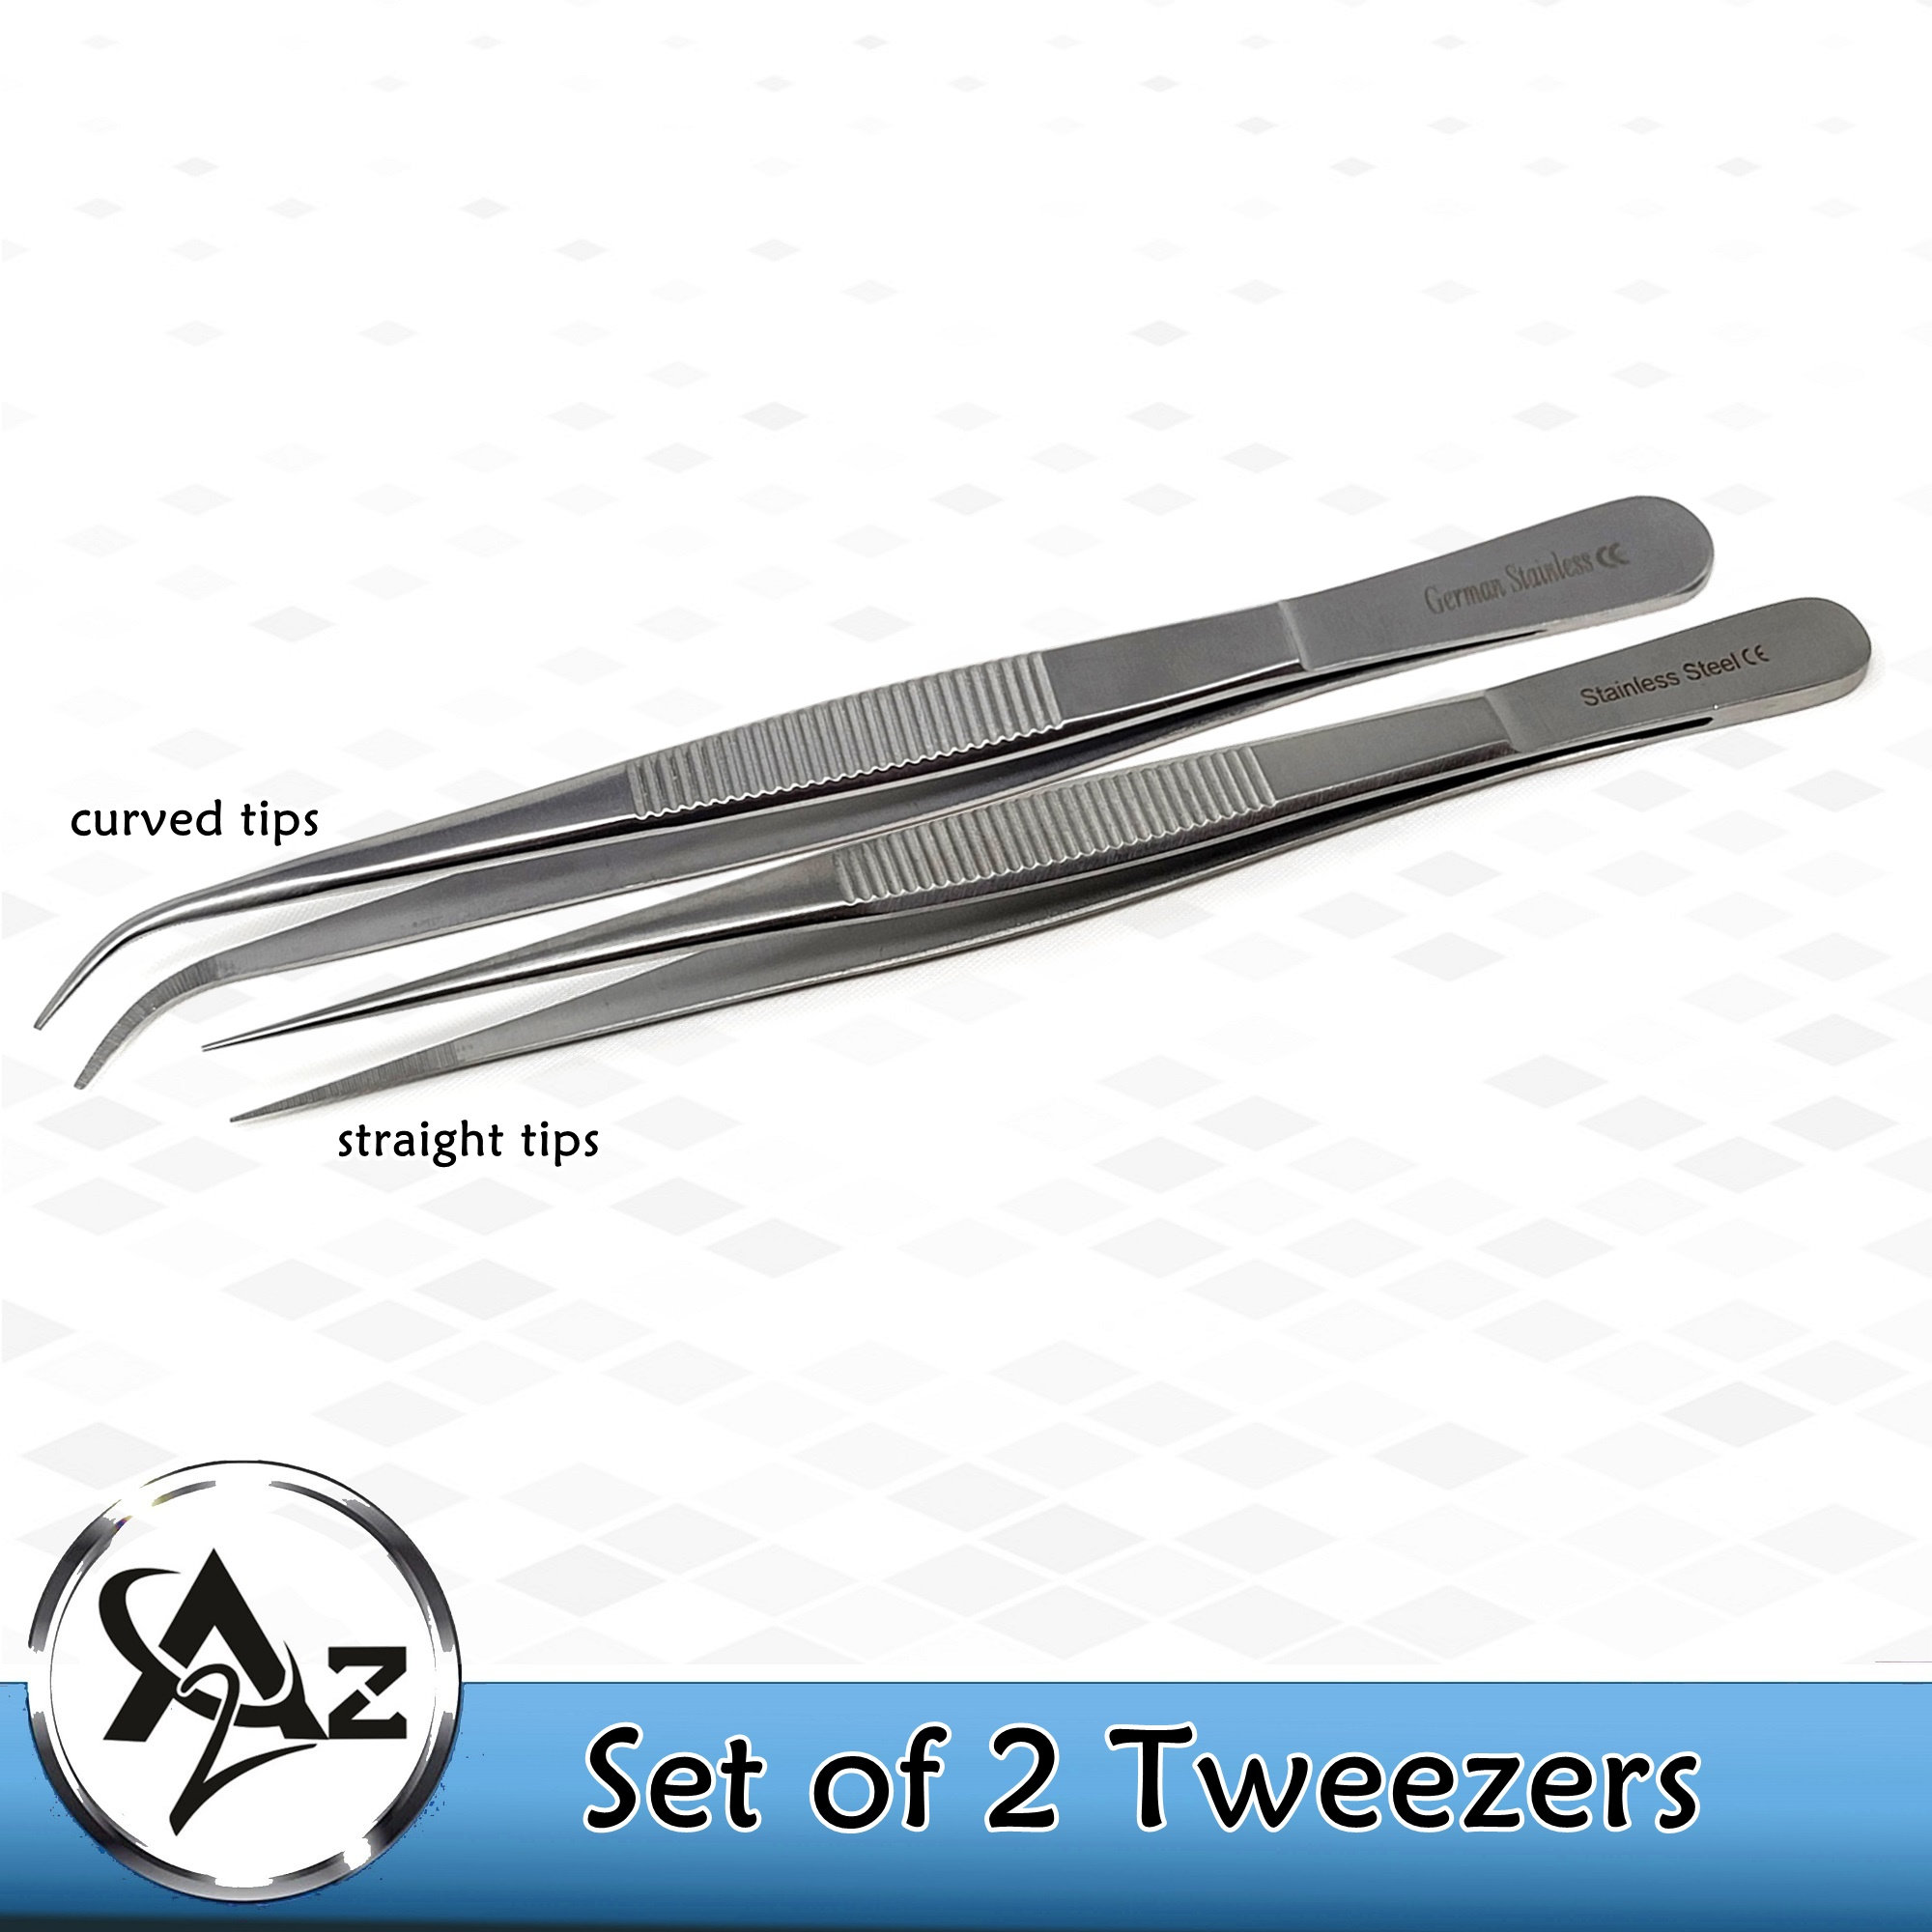 Tweezers Slide Locking PVC Rubber Tipped Set Of 2 Pointed and Blunt  Non-Marring Tweezers Jewelry Tool Tweezers Tips Have Rubber Coating for  Securely